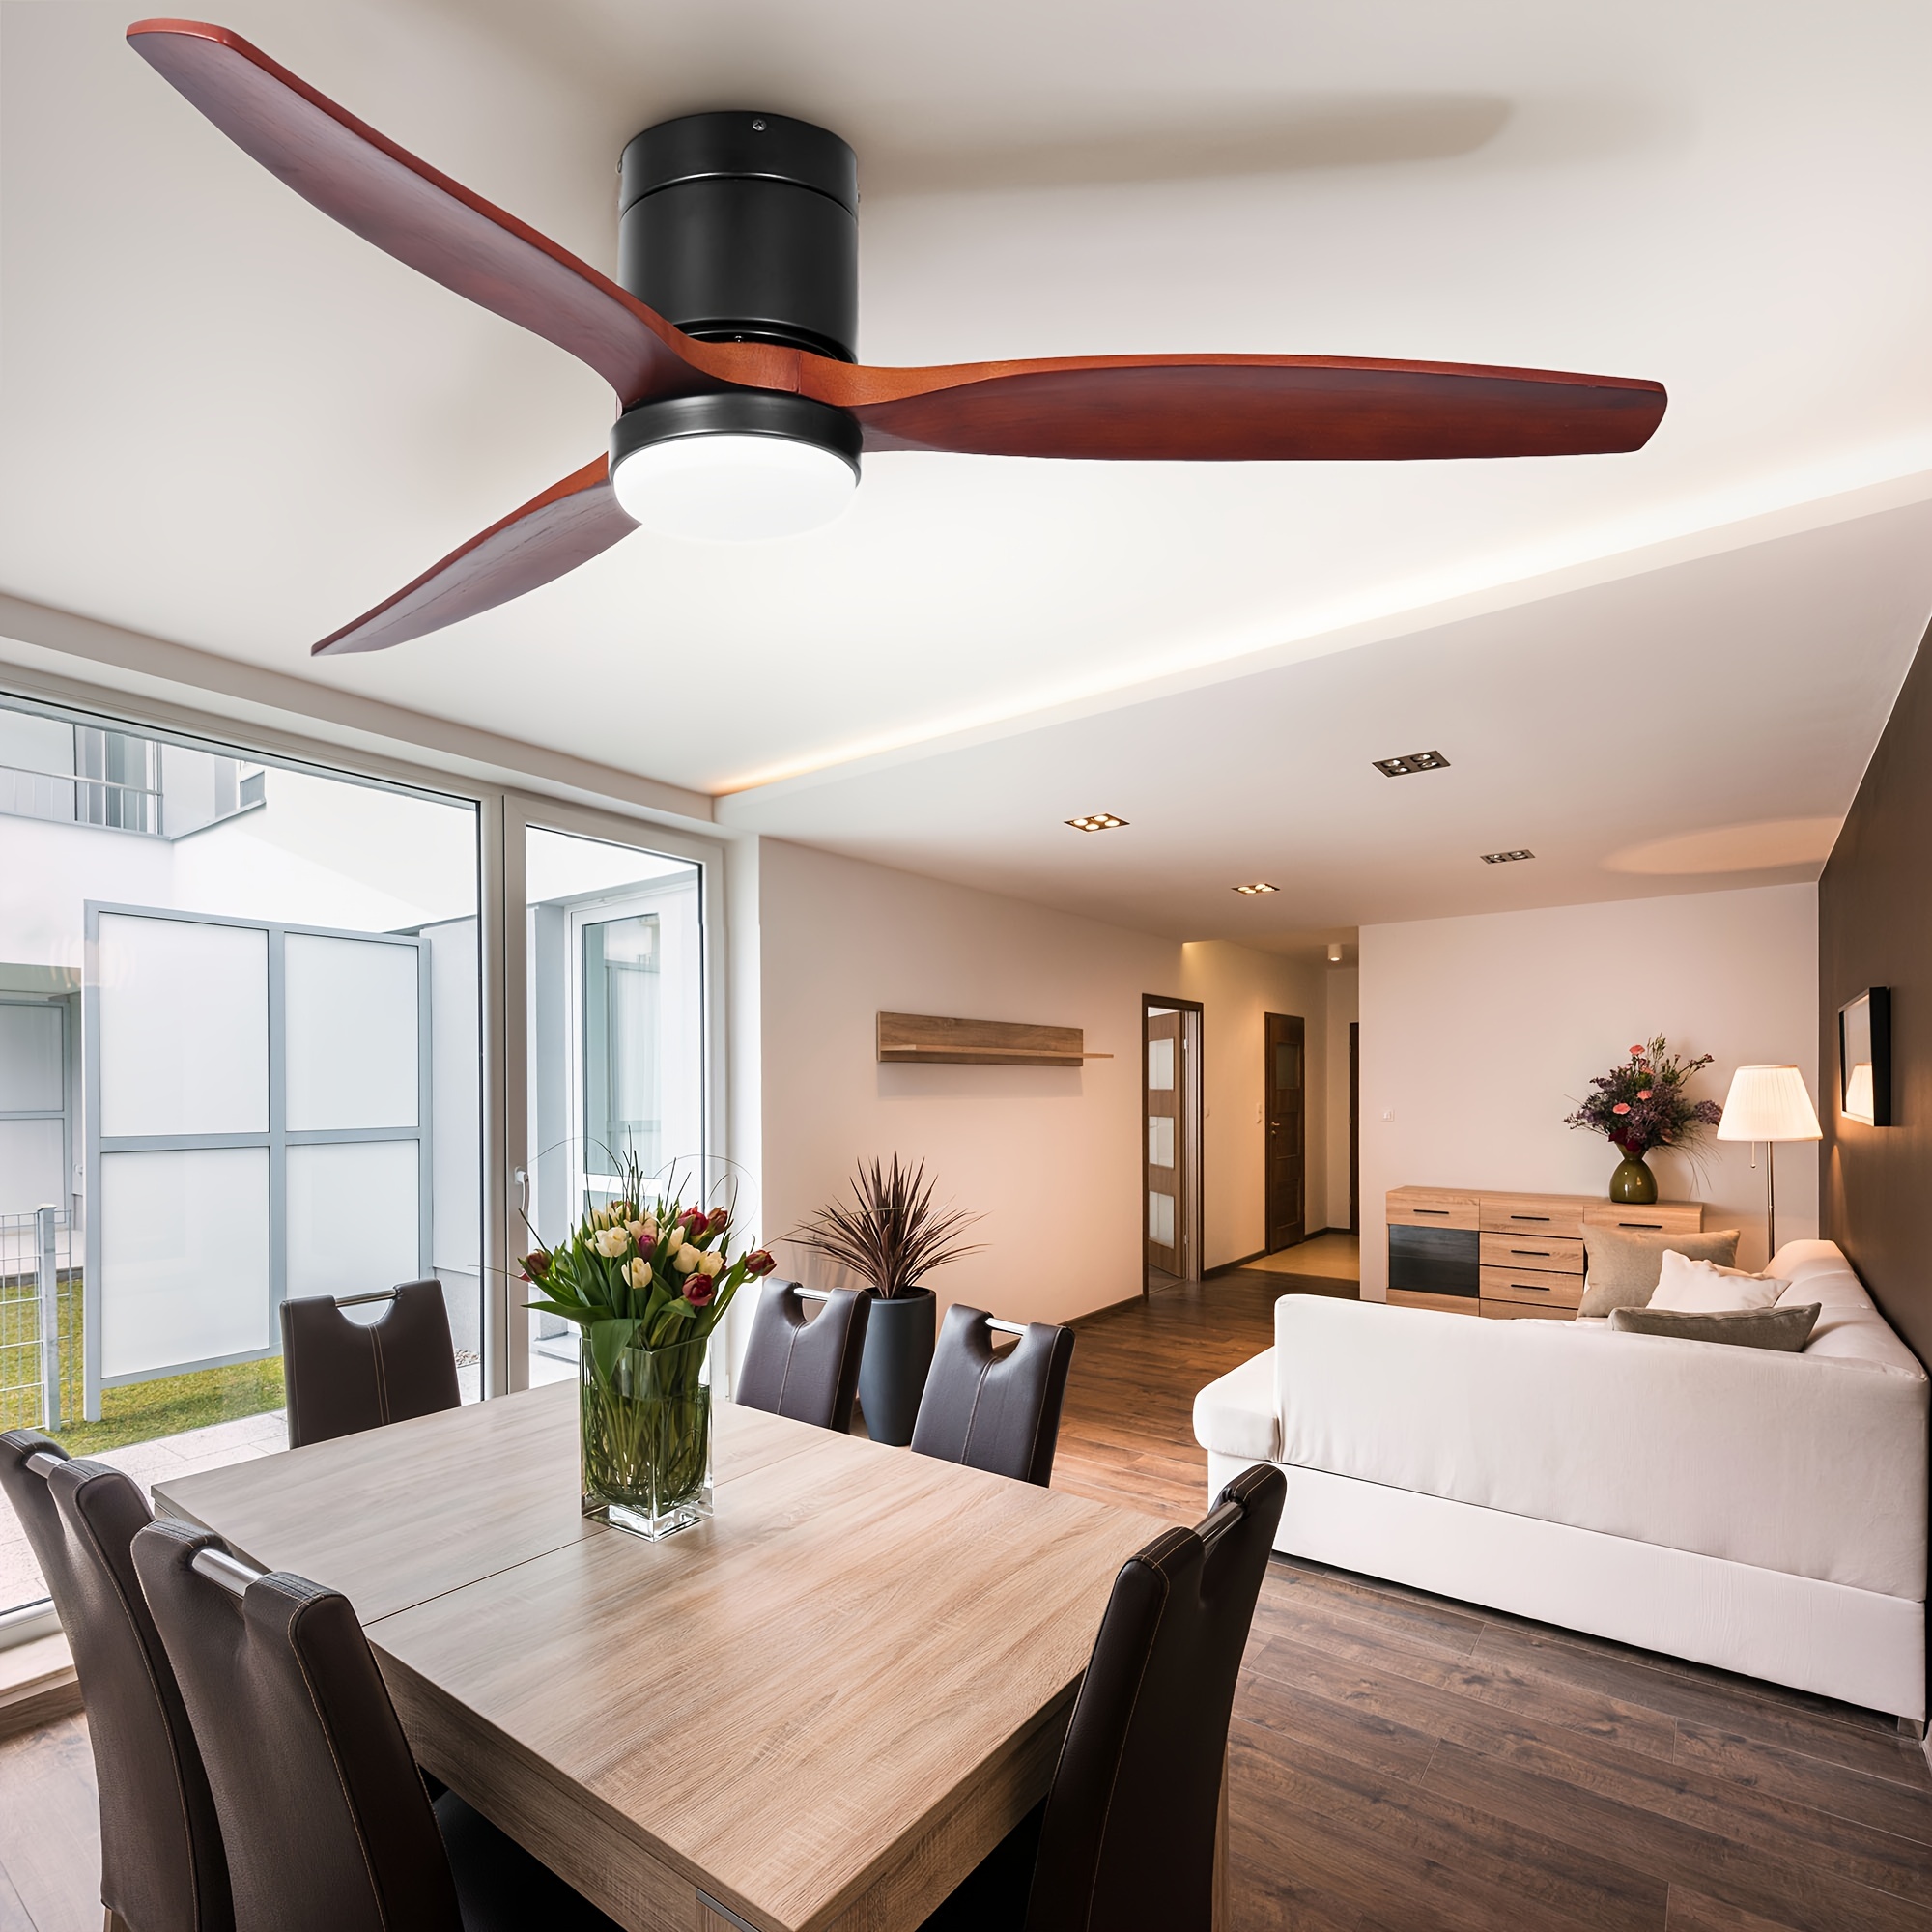 

Dwvo 52 Inch Low Profile Ceiling Fan With Light And Remote, Flush Mount Fan Light With Quiet Dc Motor, 3 Colors Light Changing, 6 Speed, Reversible Airflow For Outdoor/indoor - Black & Walnut